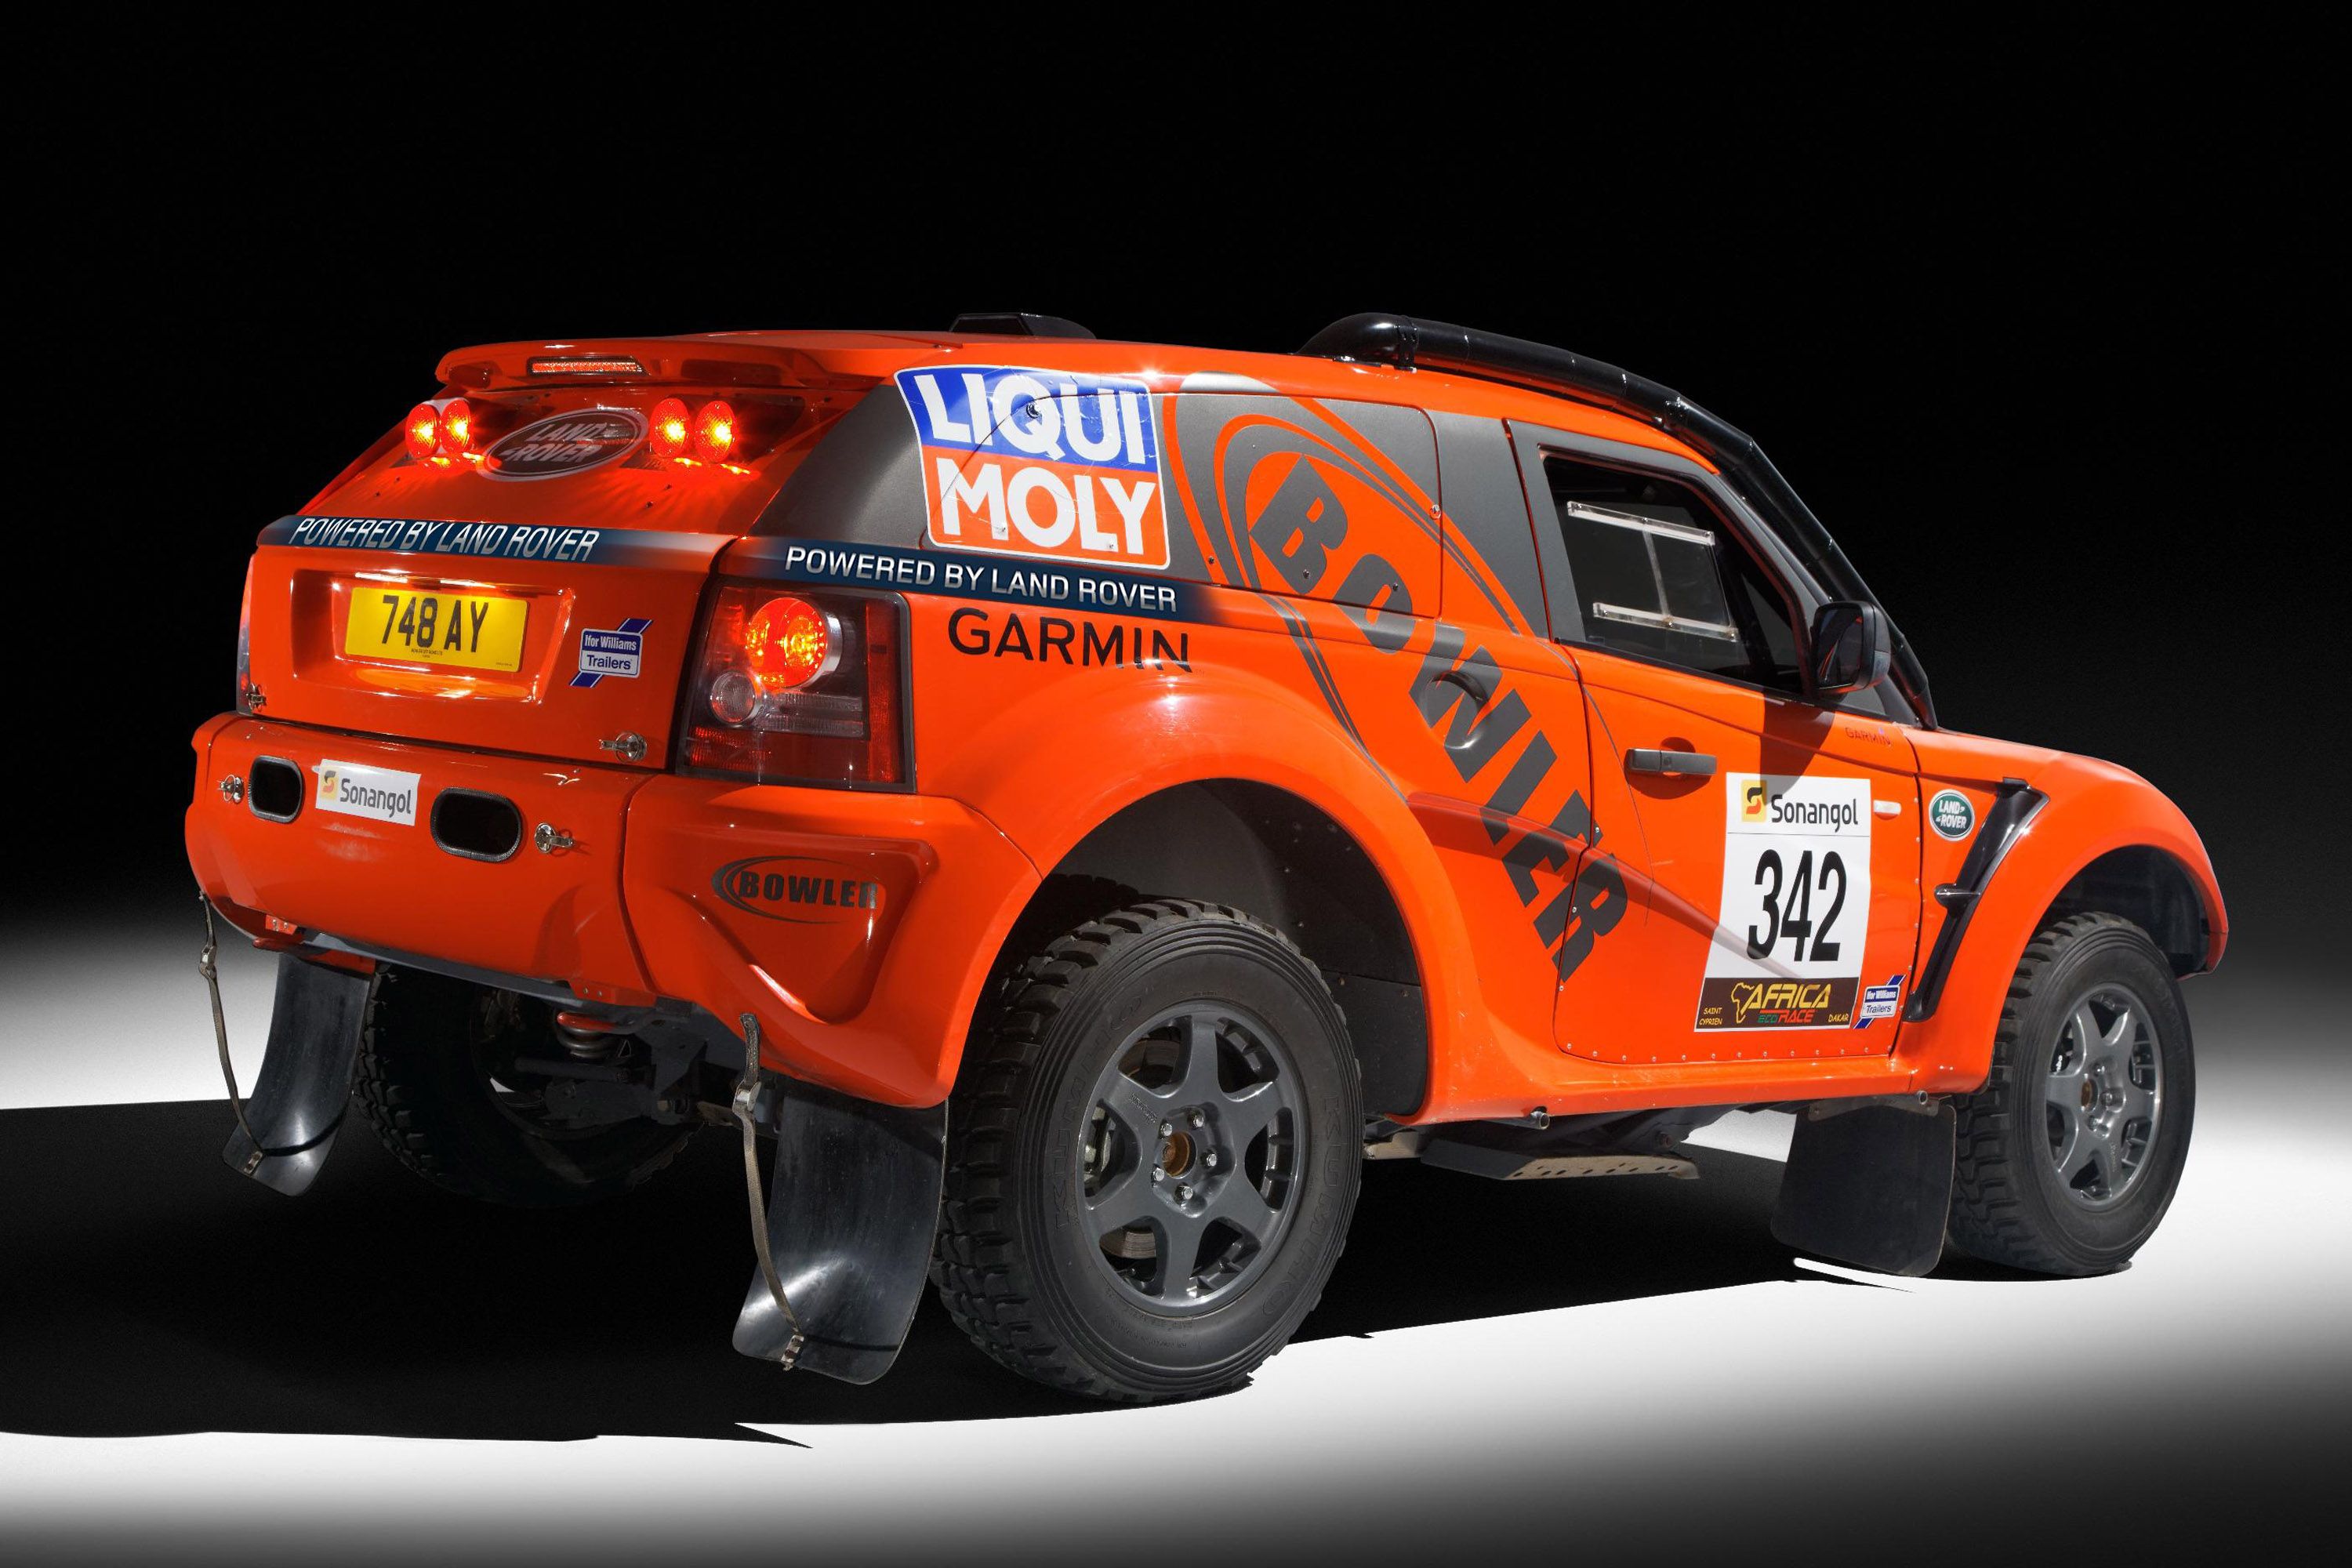 2012 Bowler EXR Rally Car by Land Rover